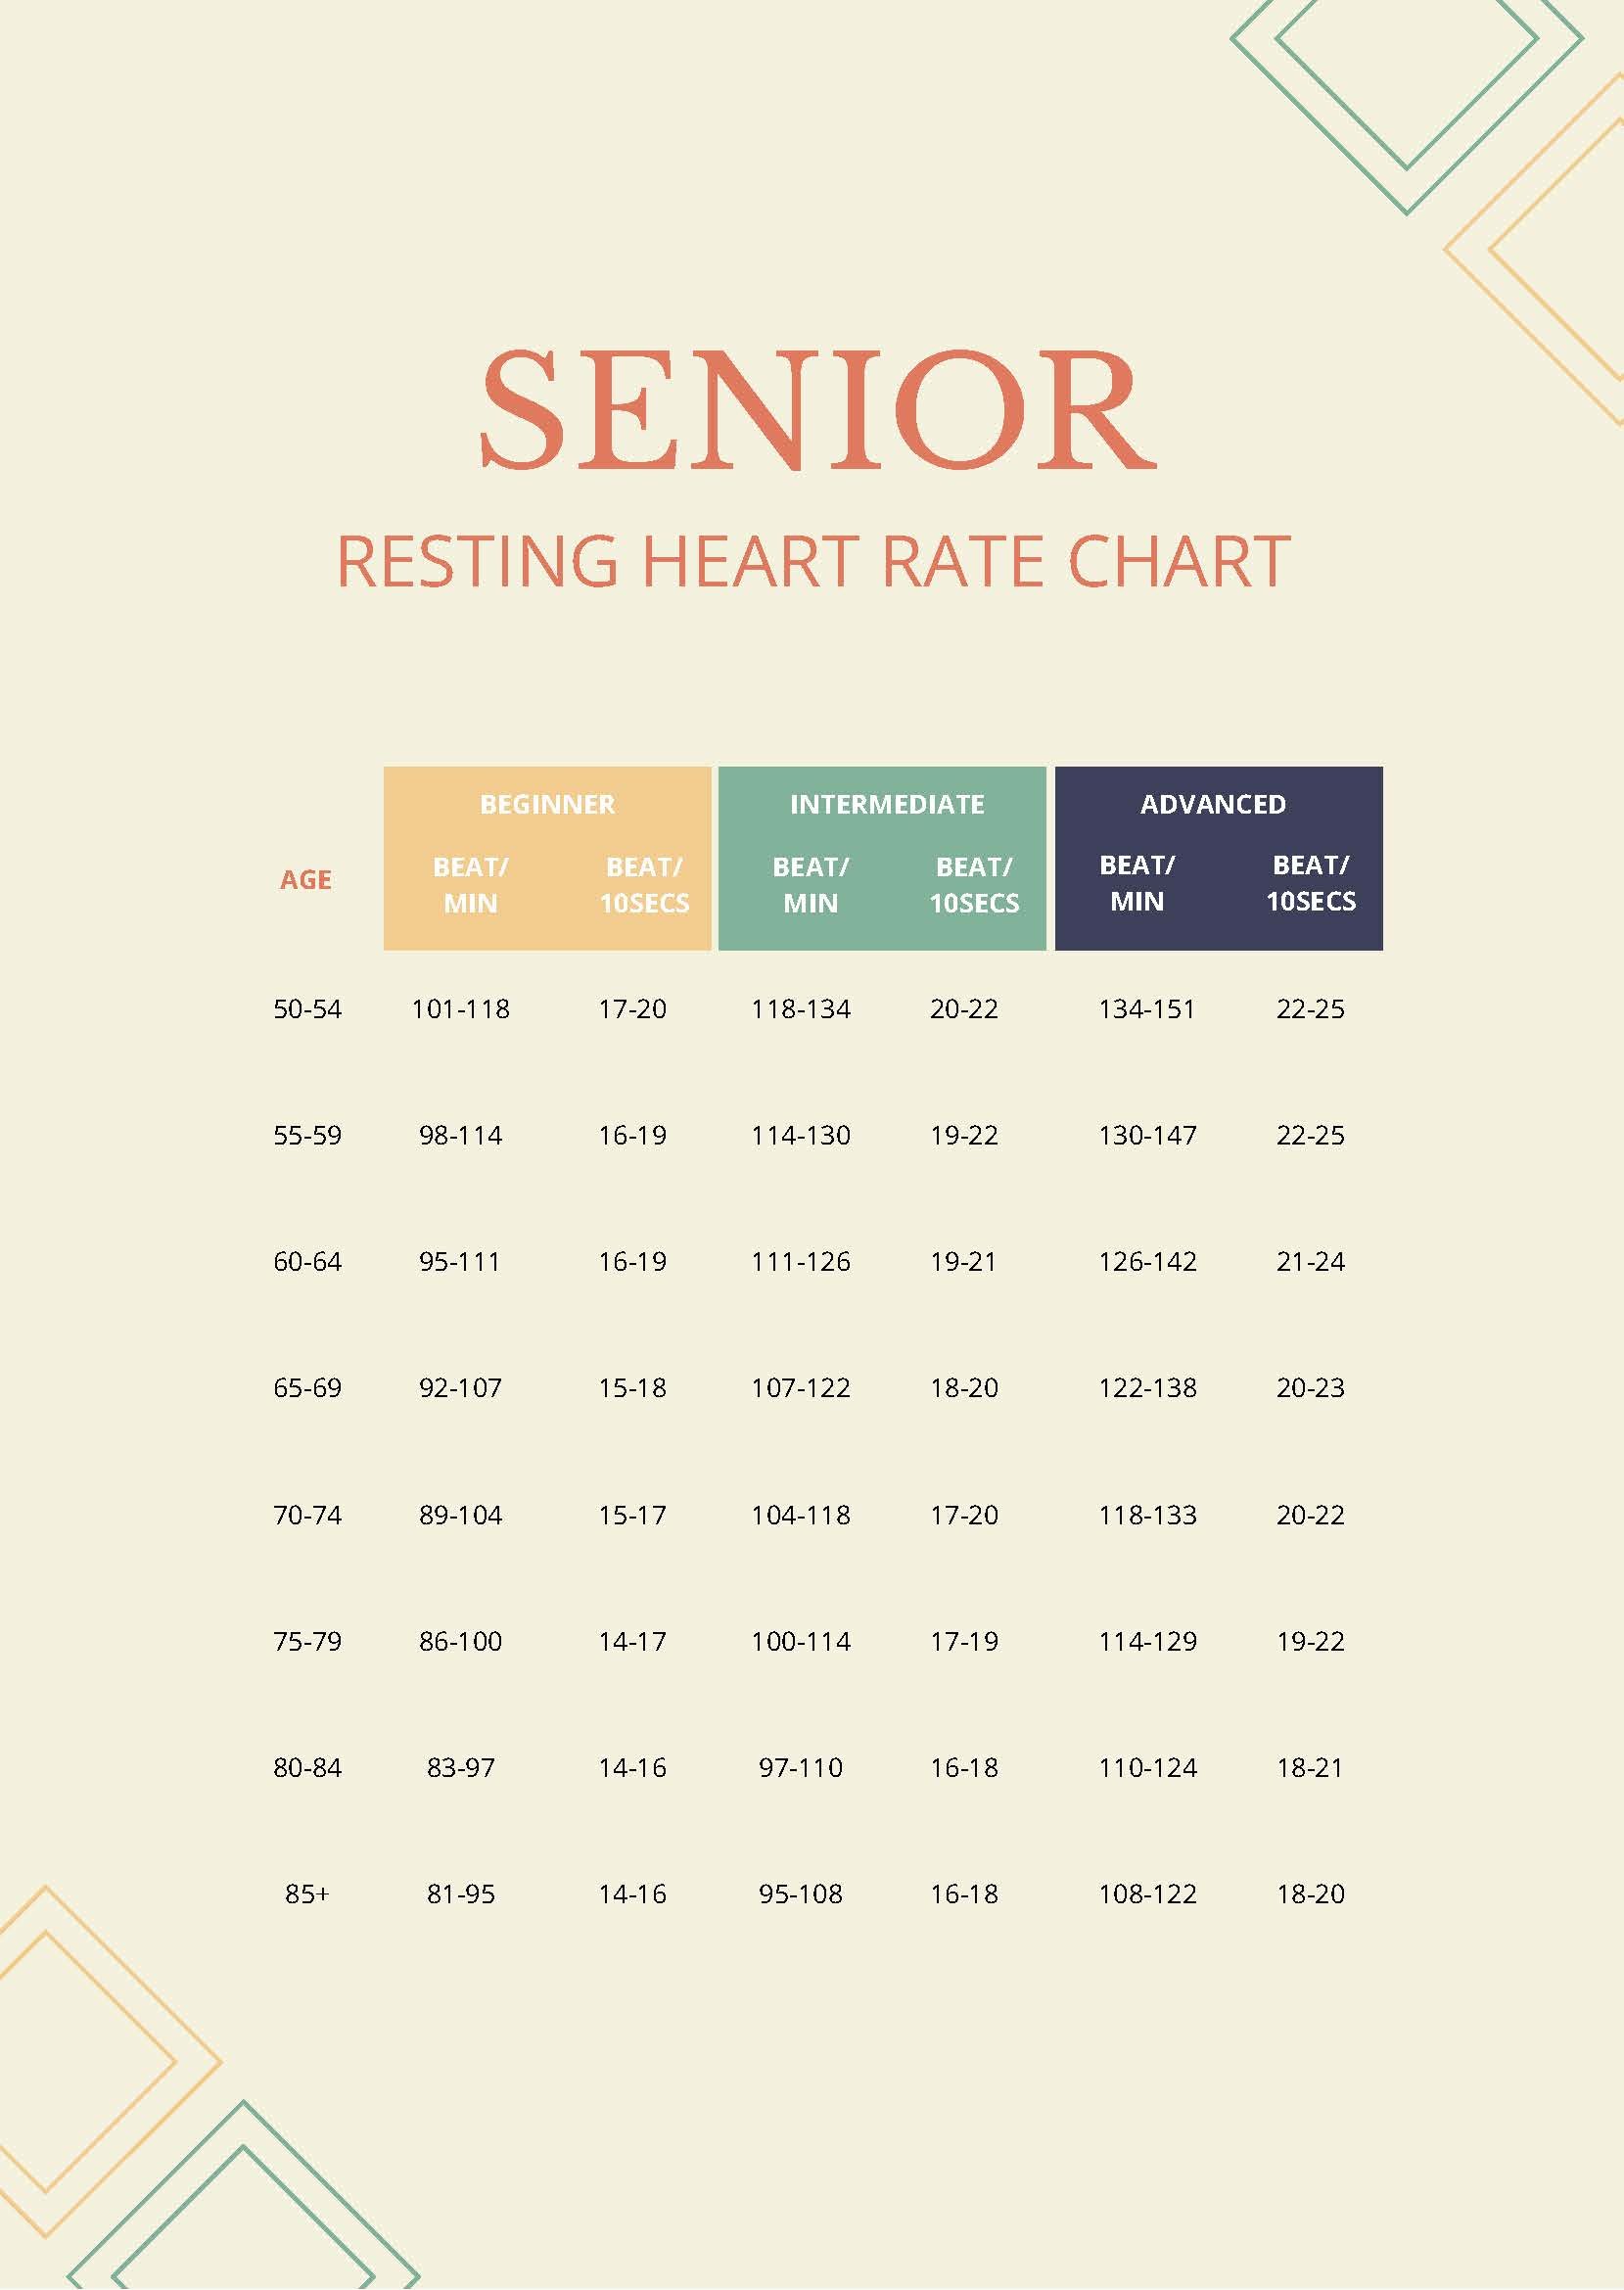 Senior Resting Heart Rate Chart in PDF